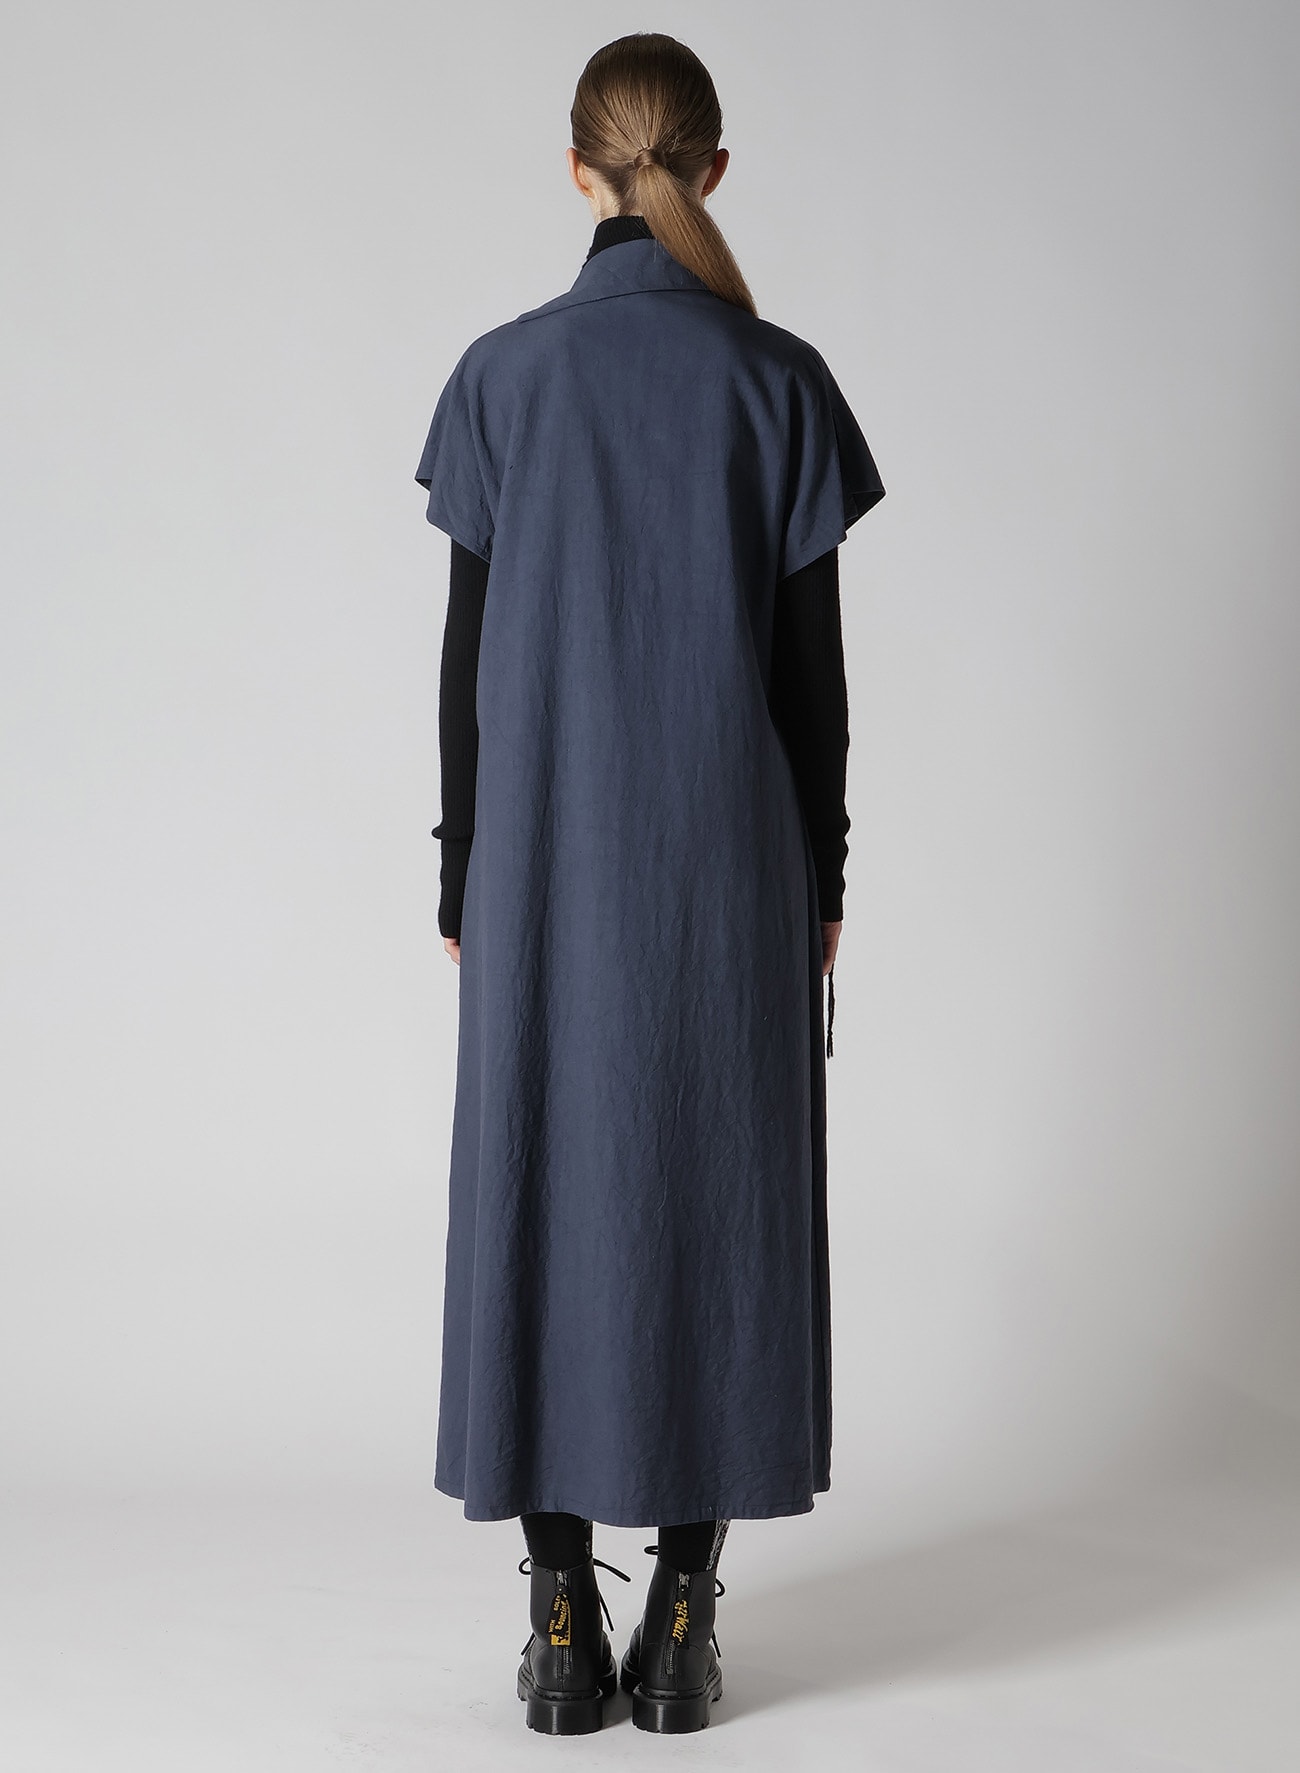 【8/2 12:00(JST) Release】TWILL GARMENT WASH FRENCH SLEEVE DRESS